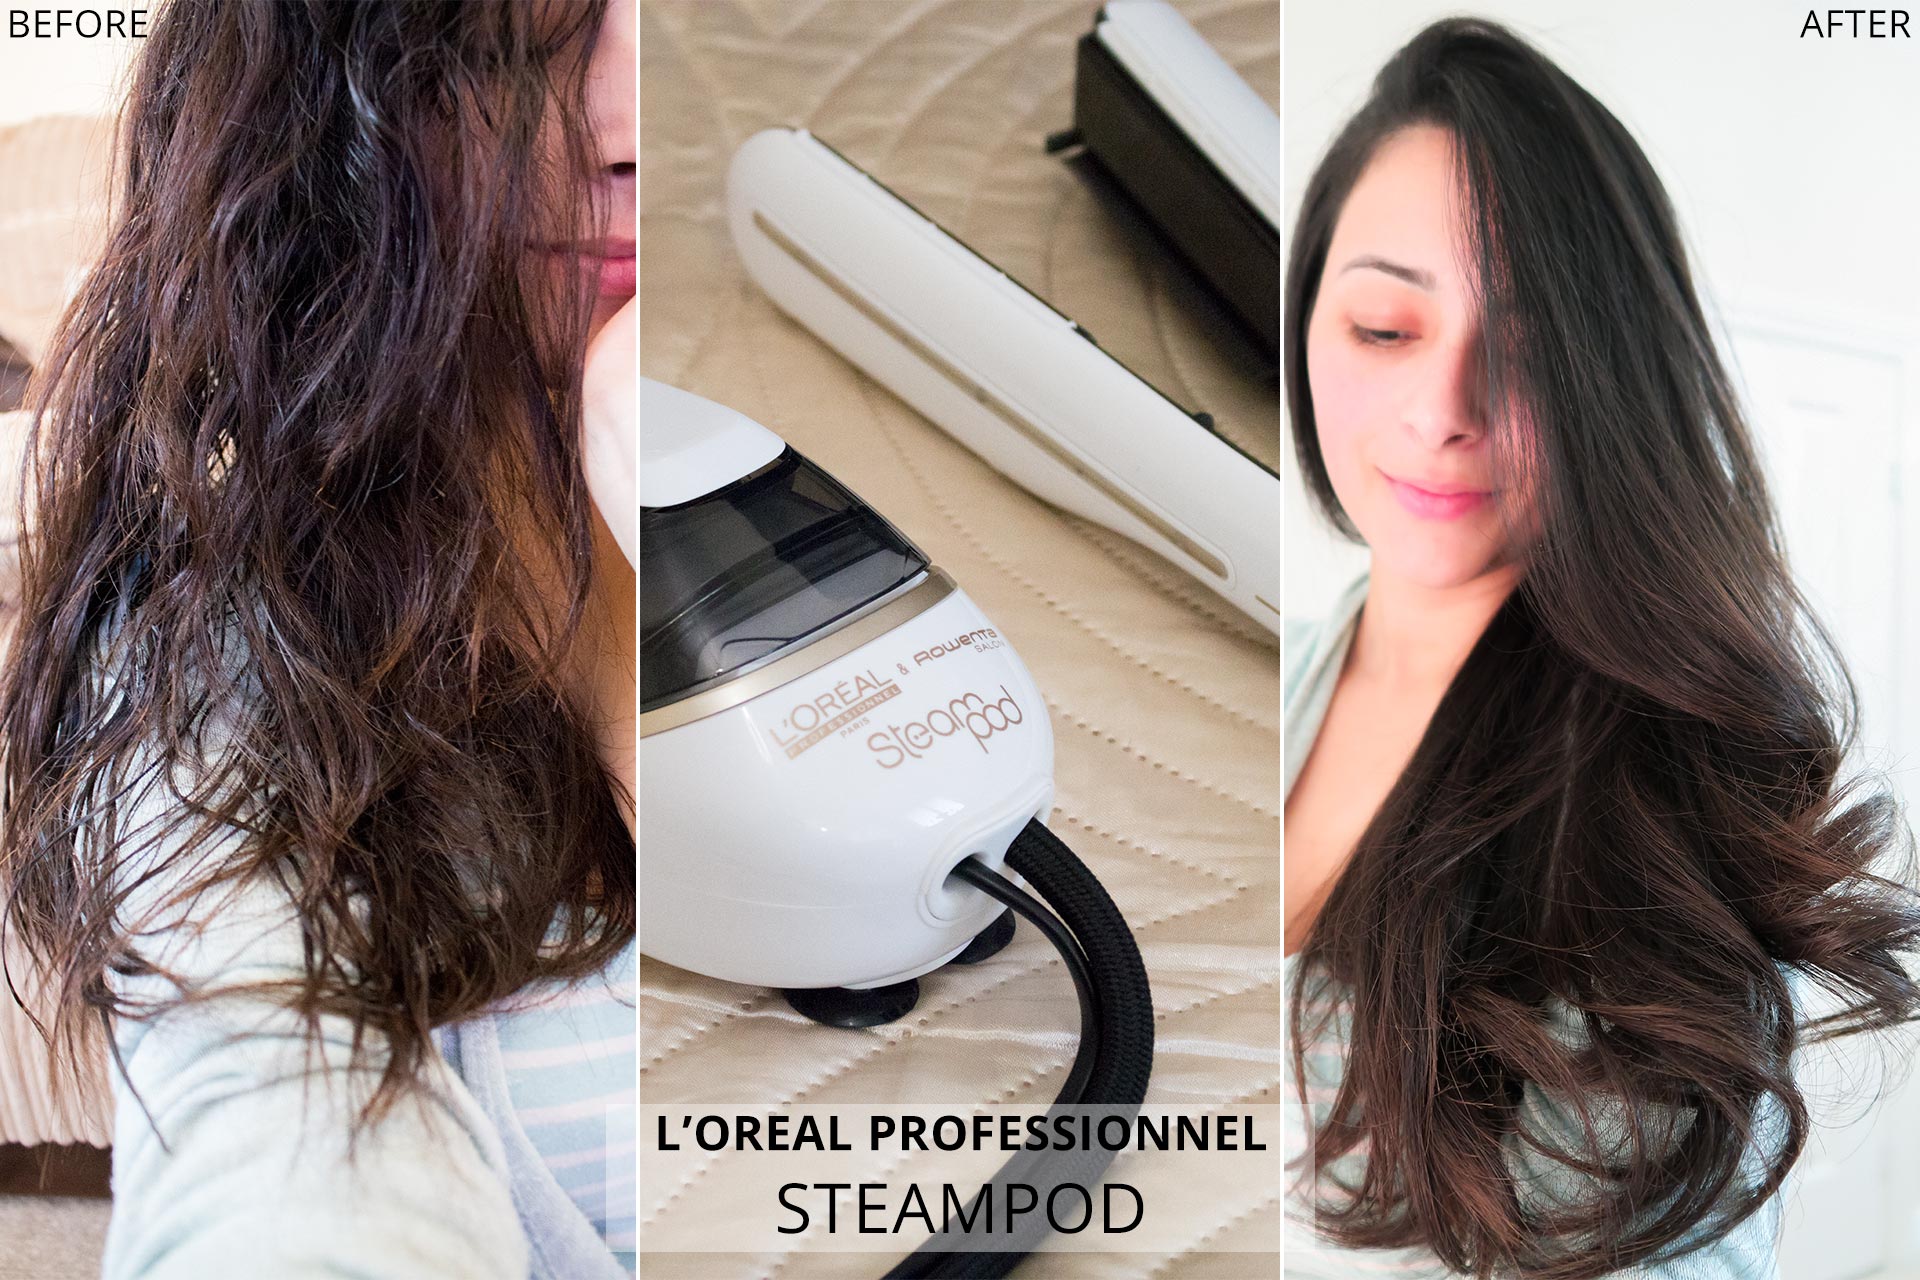 L'Oreal Steampod Review (Before and After)